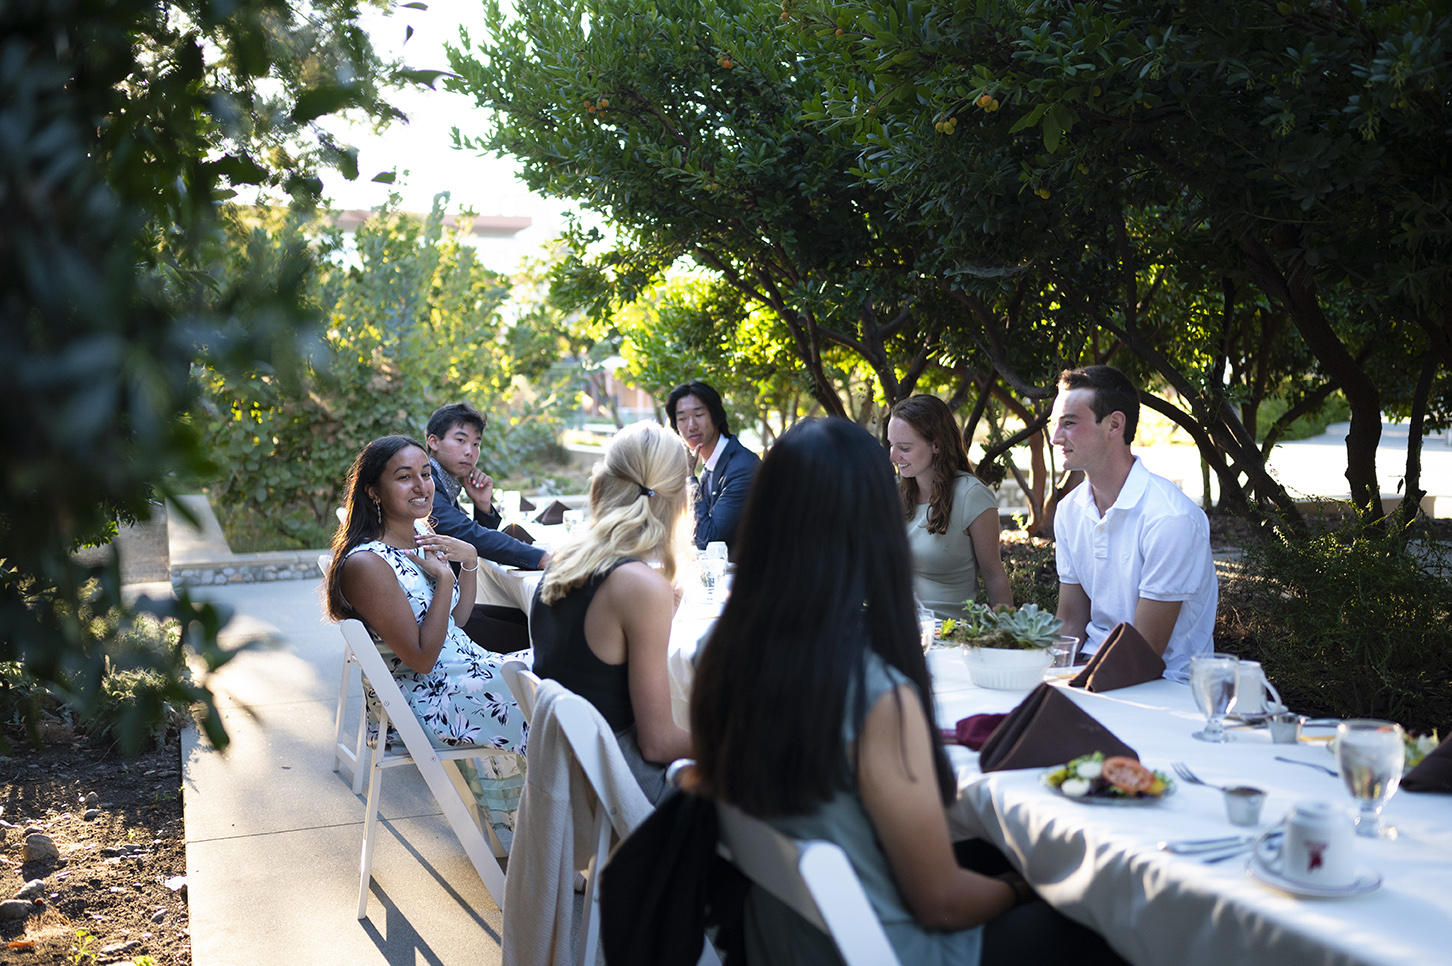 Candid photo of the head table dinner on the Athenaeum Patio during the first Distinguished Speakers event of 2021.